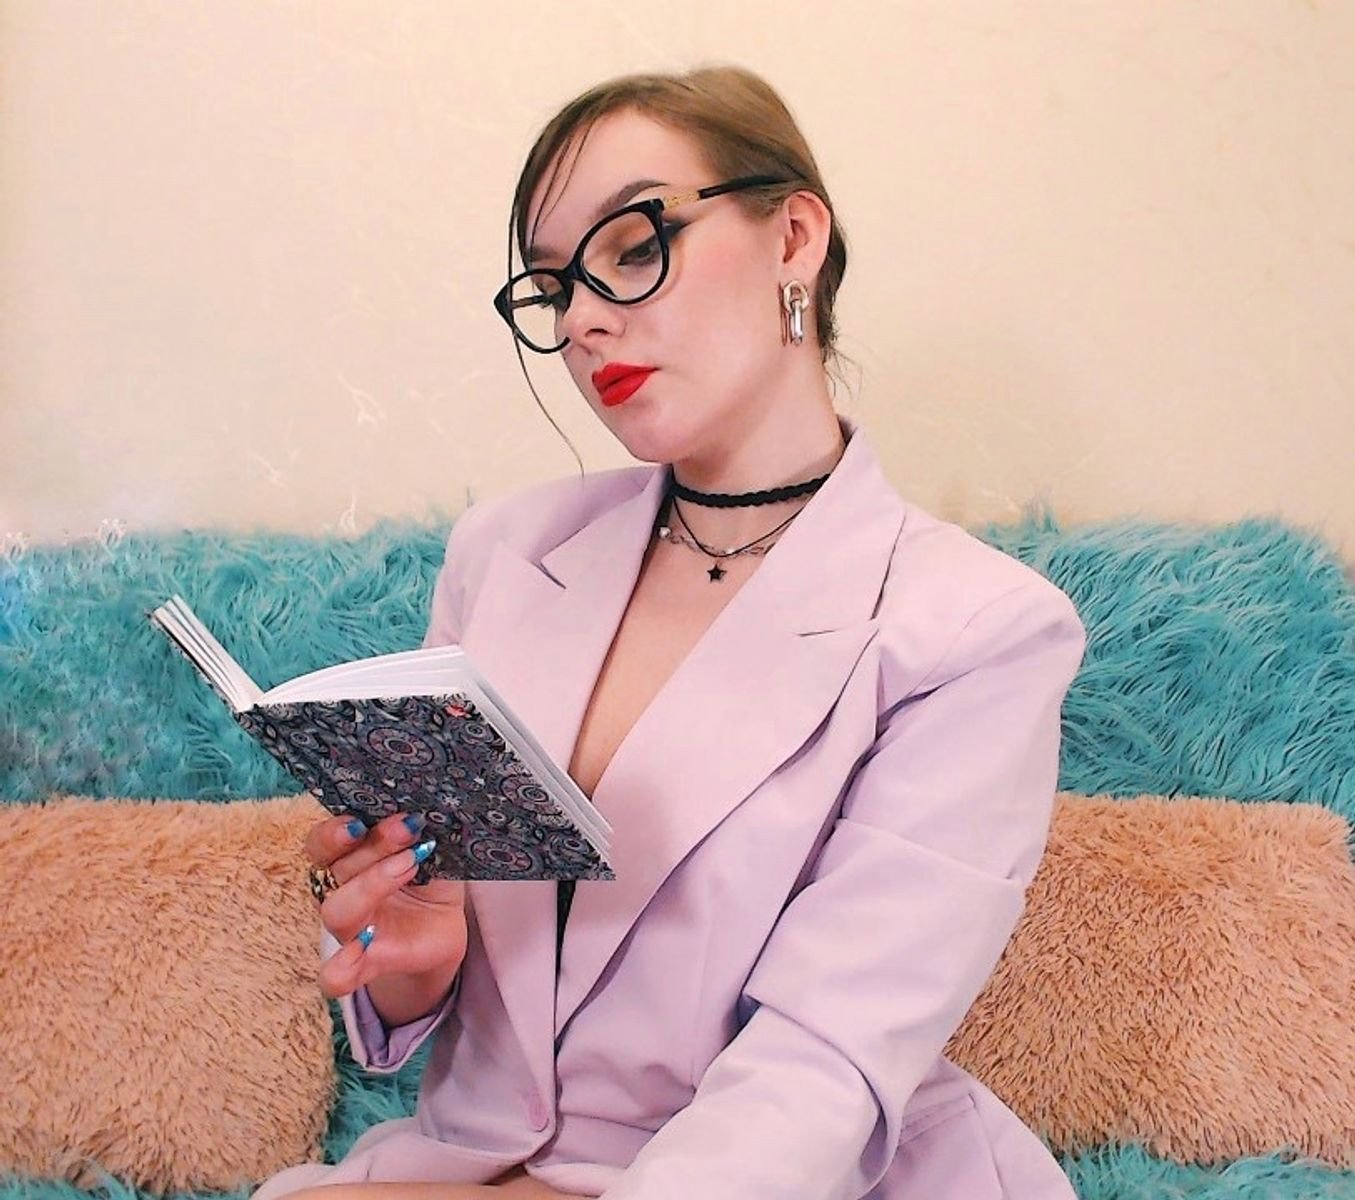 SkyPrivate live sex chat with Diona Delight